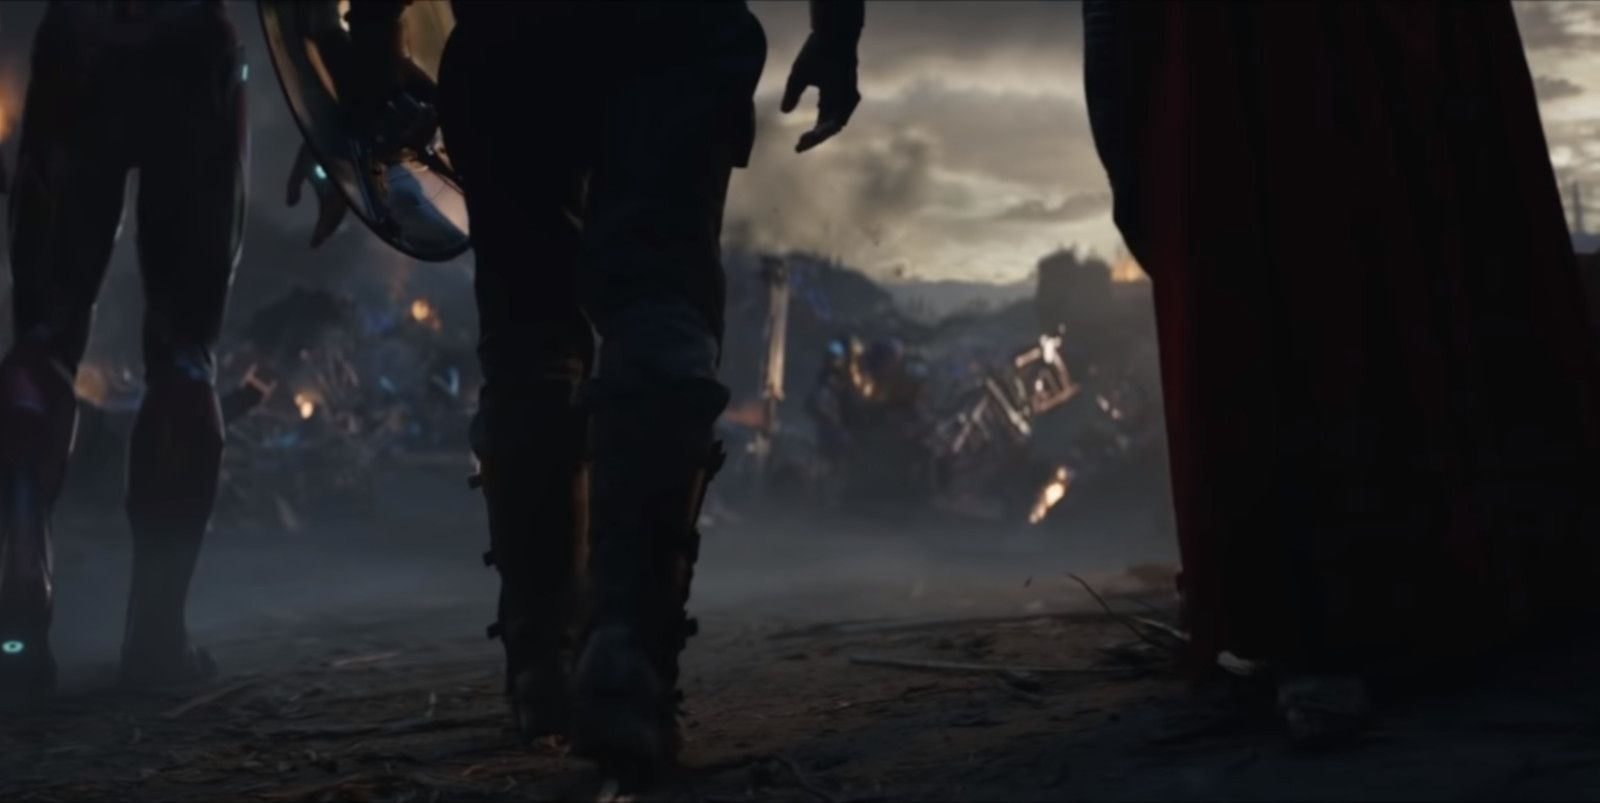 Thor, Captain America, and Iron Man approach Thanos in The Avengers: Endgame